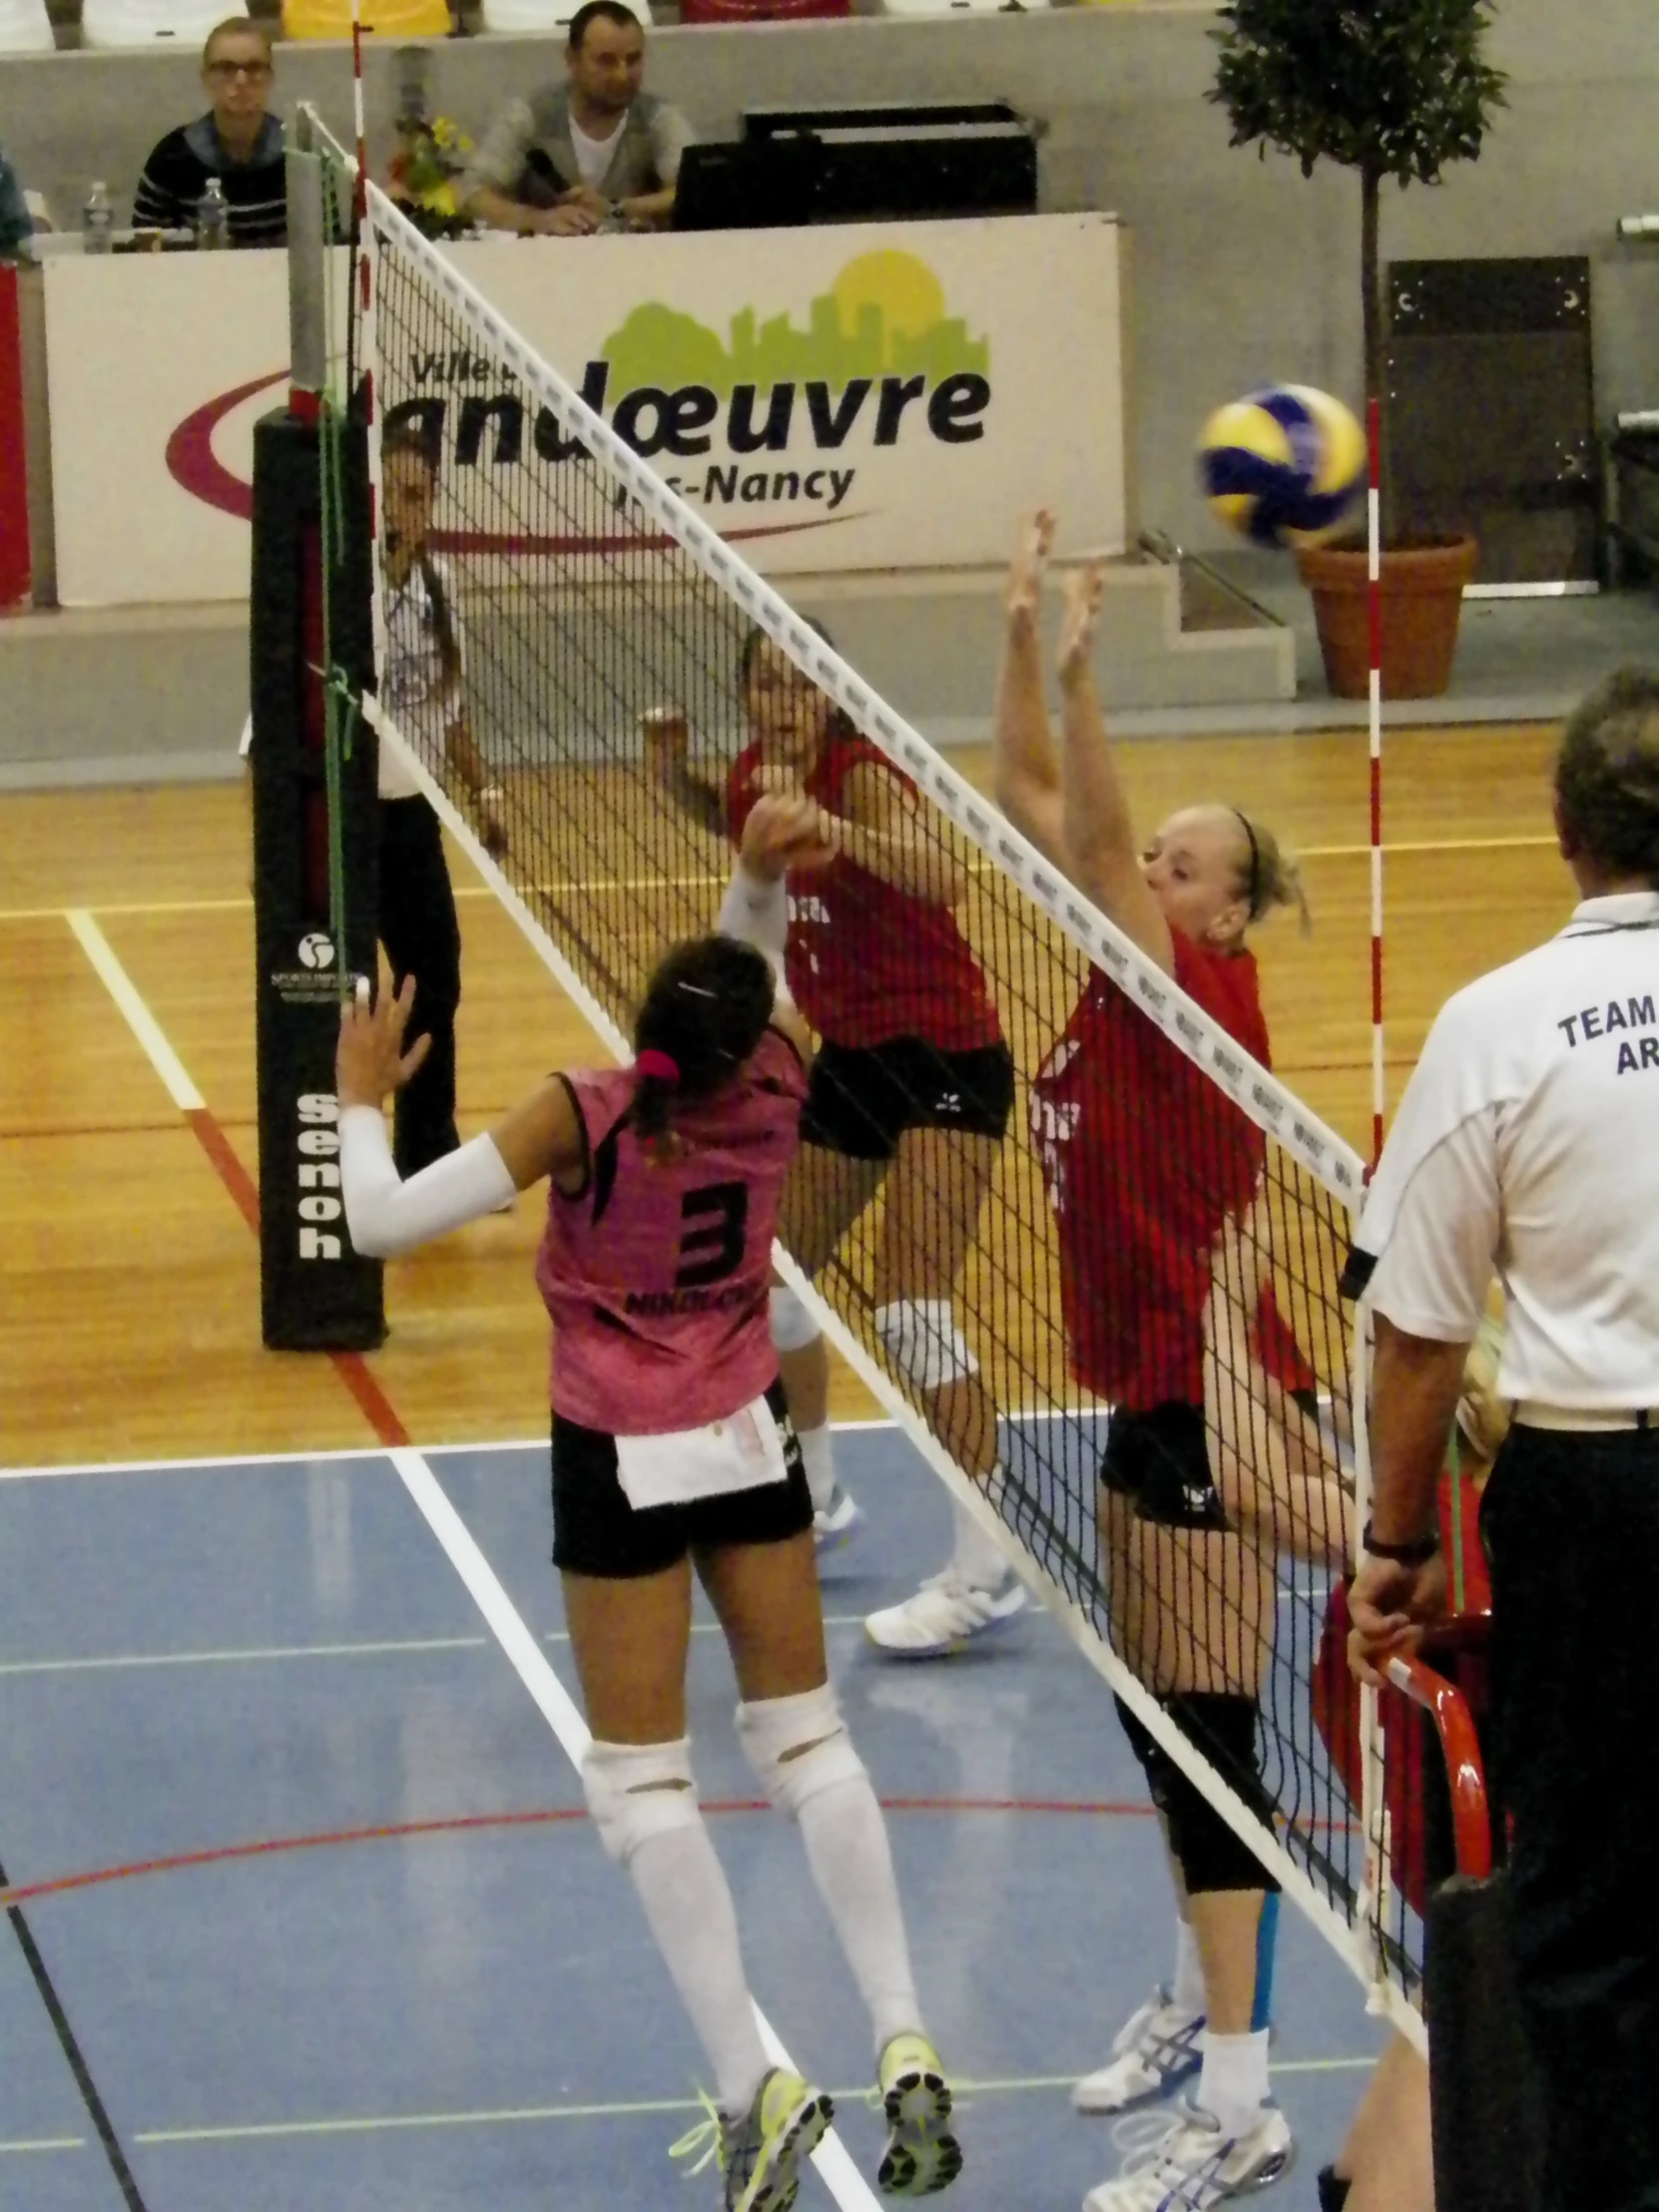 some women playing a game of volleyball in a gym